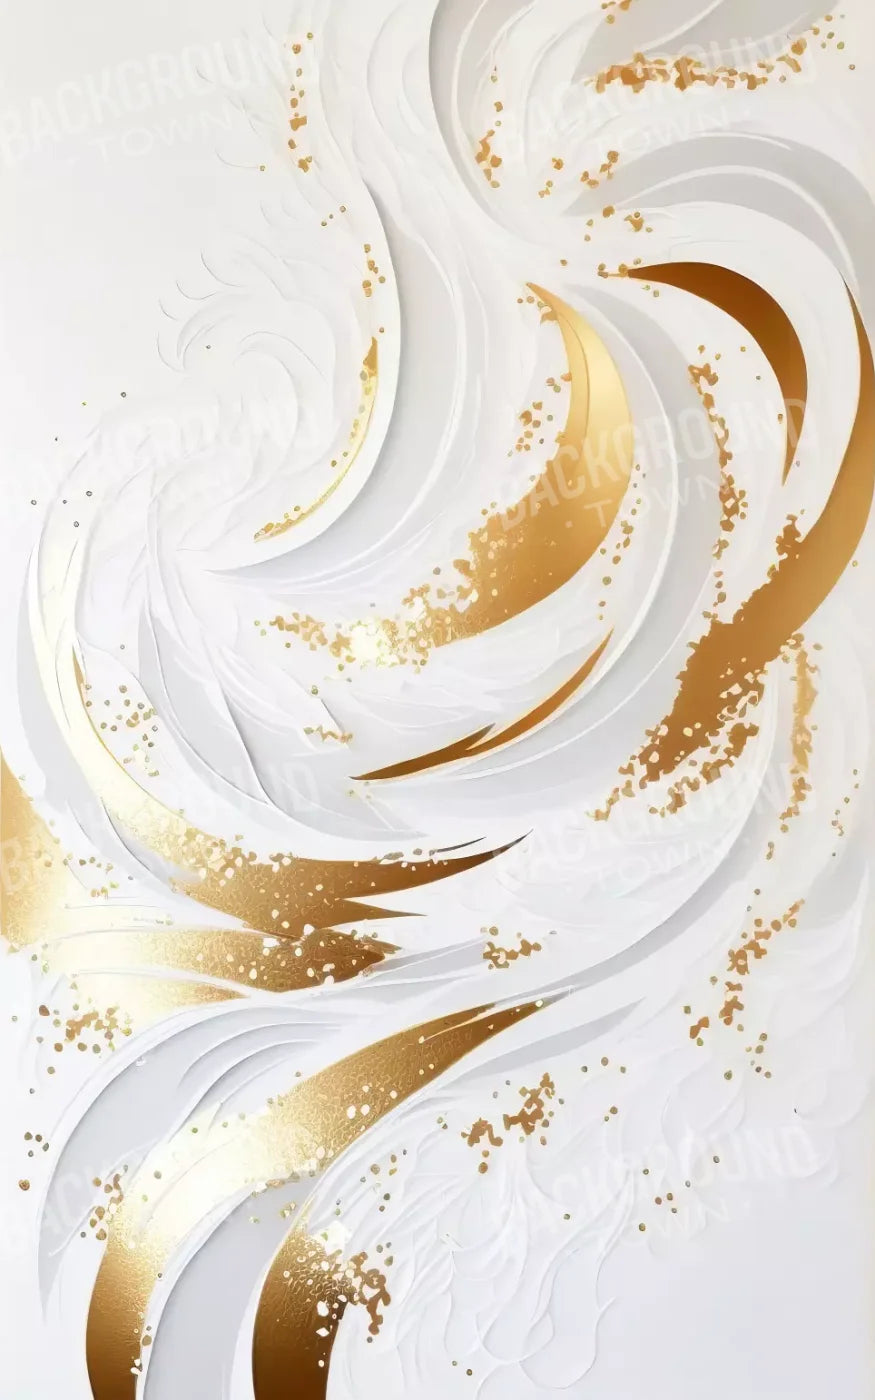 Abstract Swirl In White And Gold 9X14 Ultracloth ( 108 X 168 Inch ) Backdrop